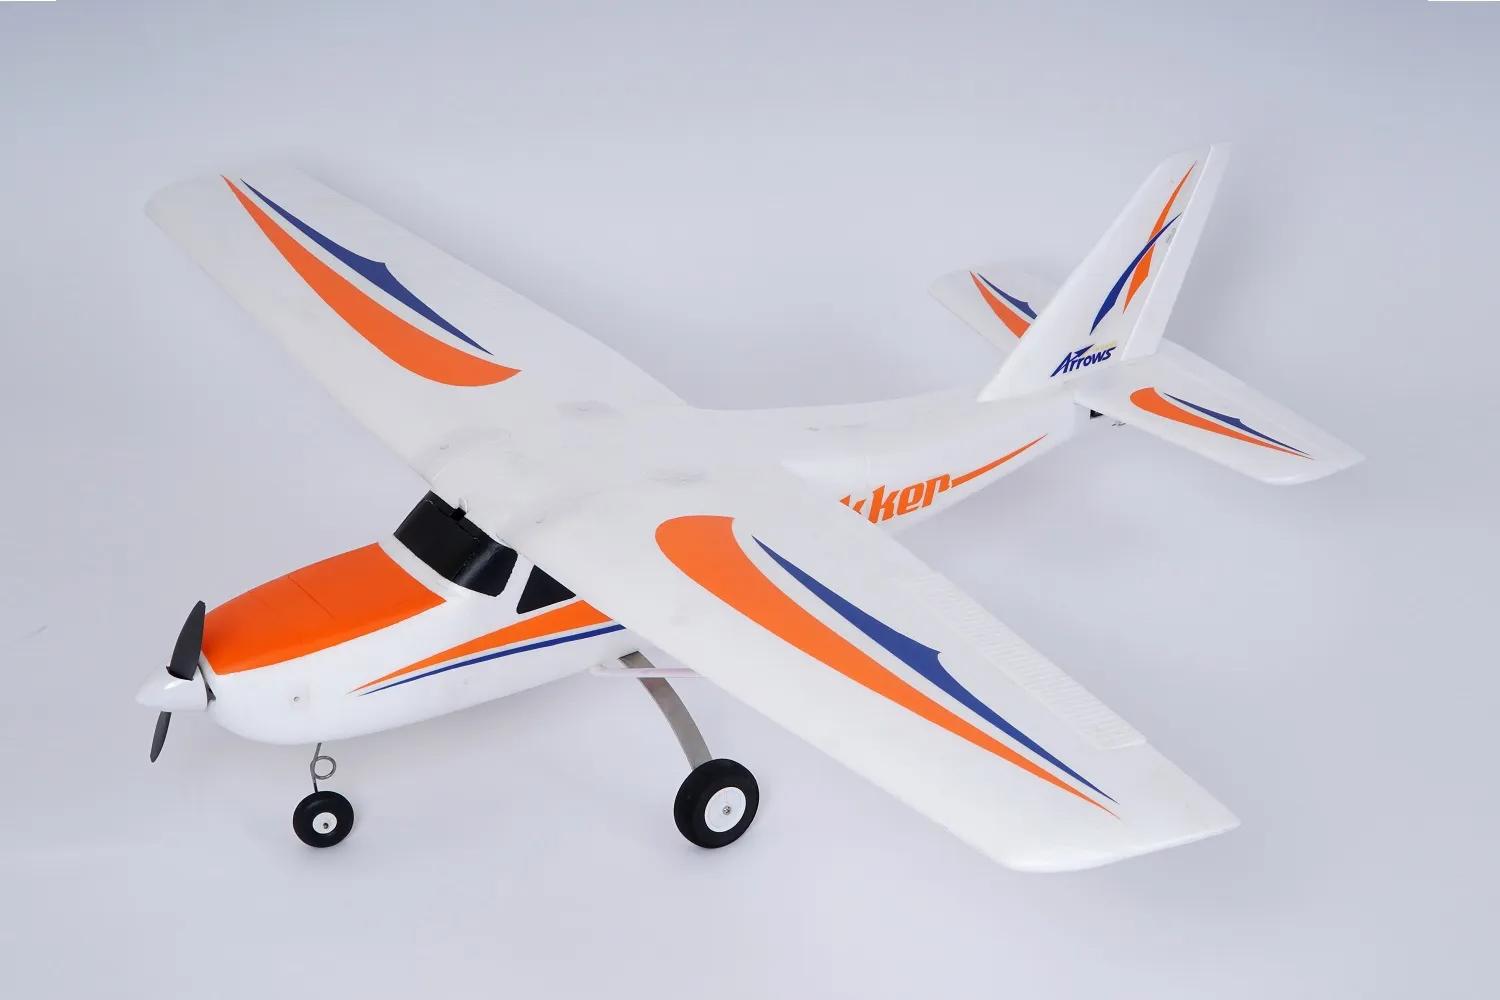 Rtf Gas Powered Rc Planes: RTF Gas Powered RC Planes: A Versatile and Exciting Hobby Option